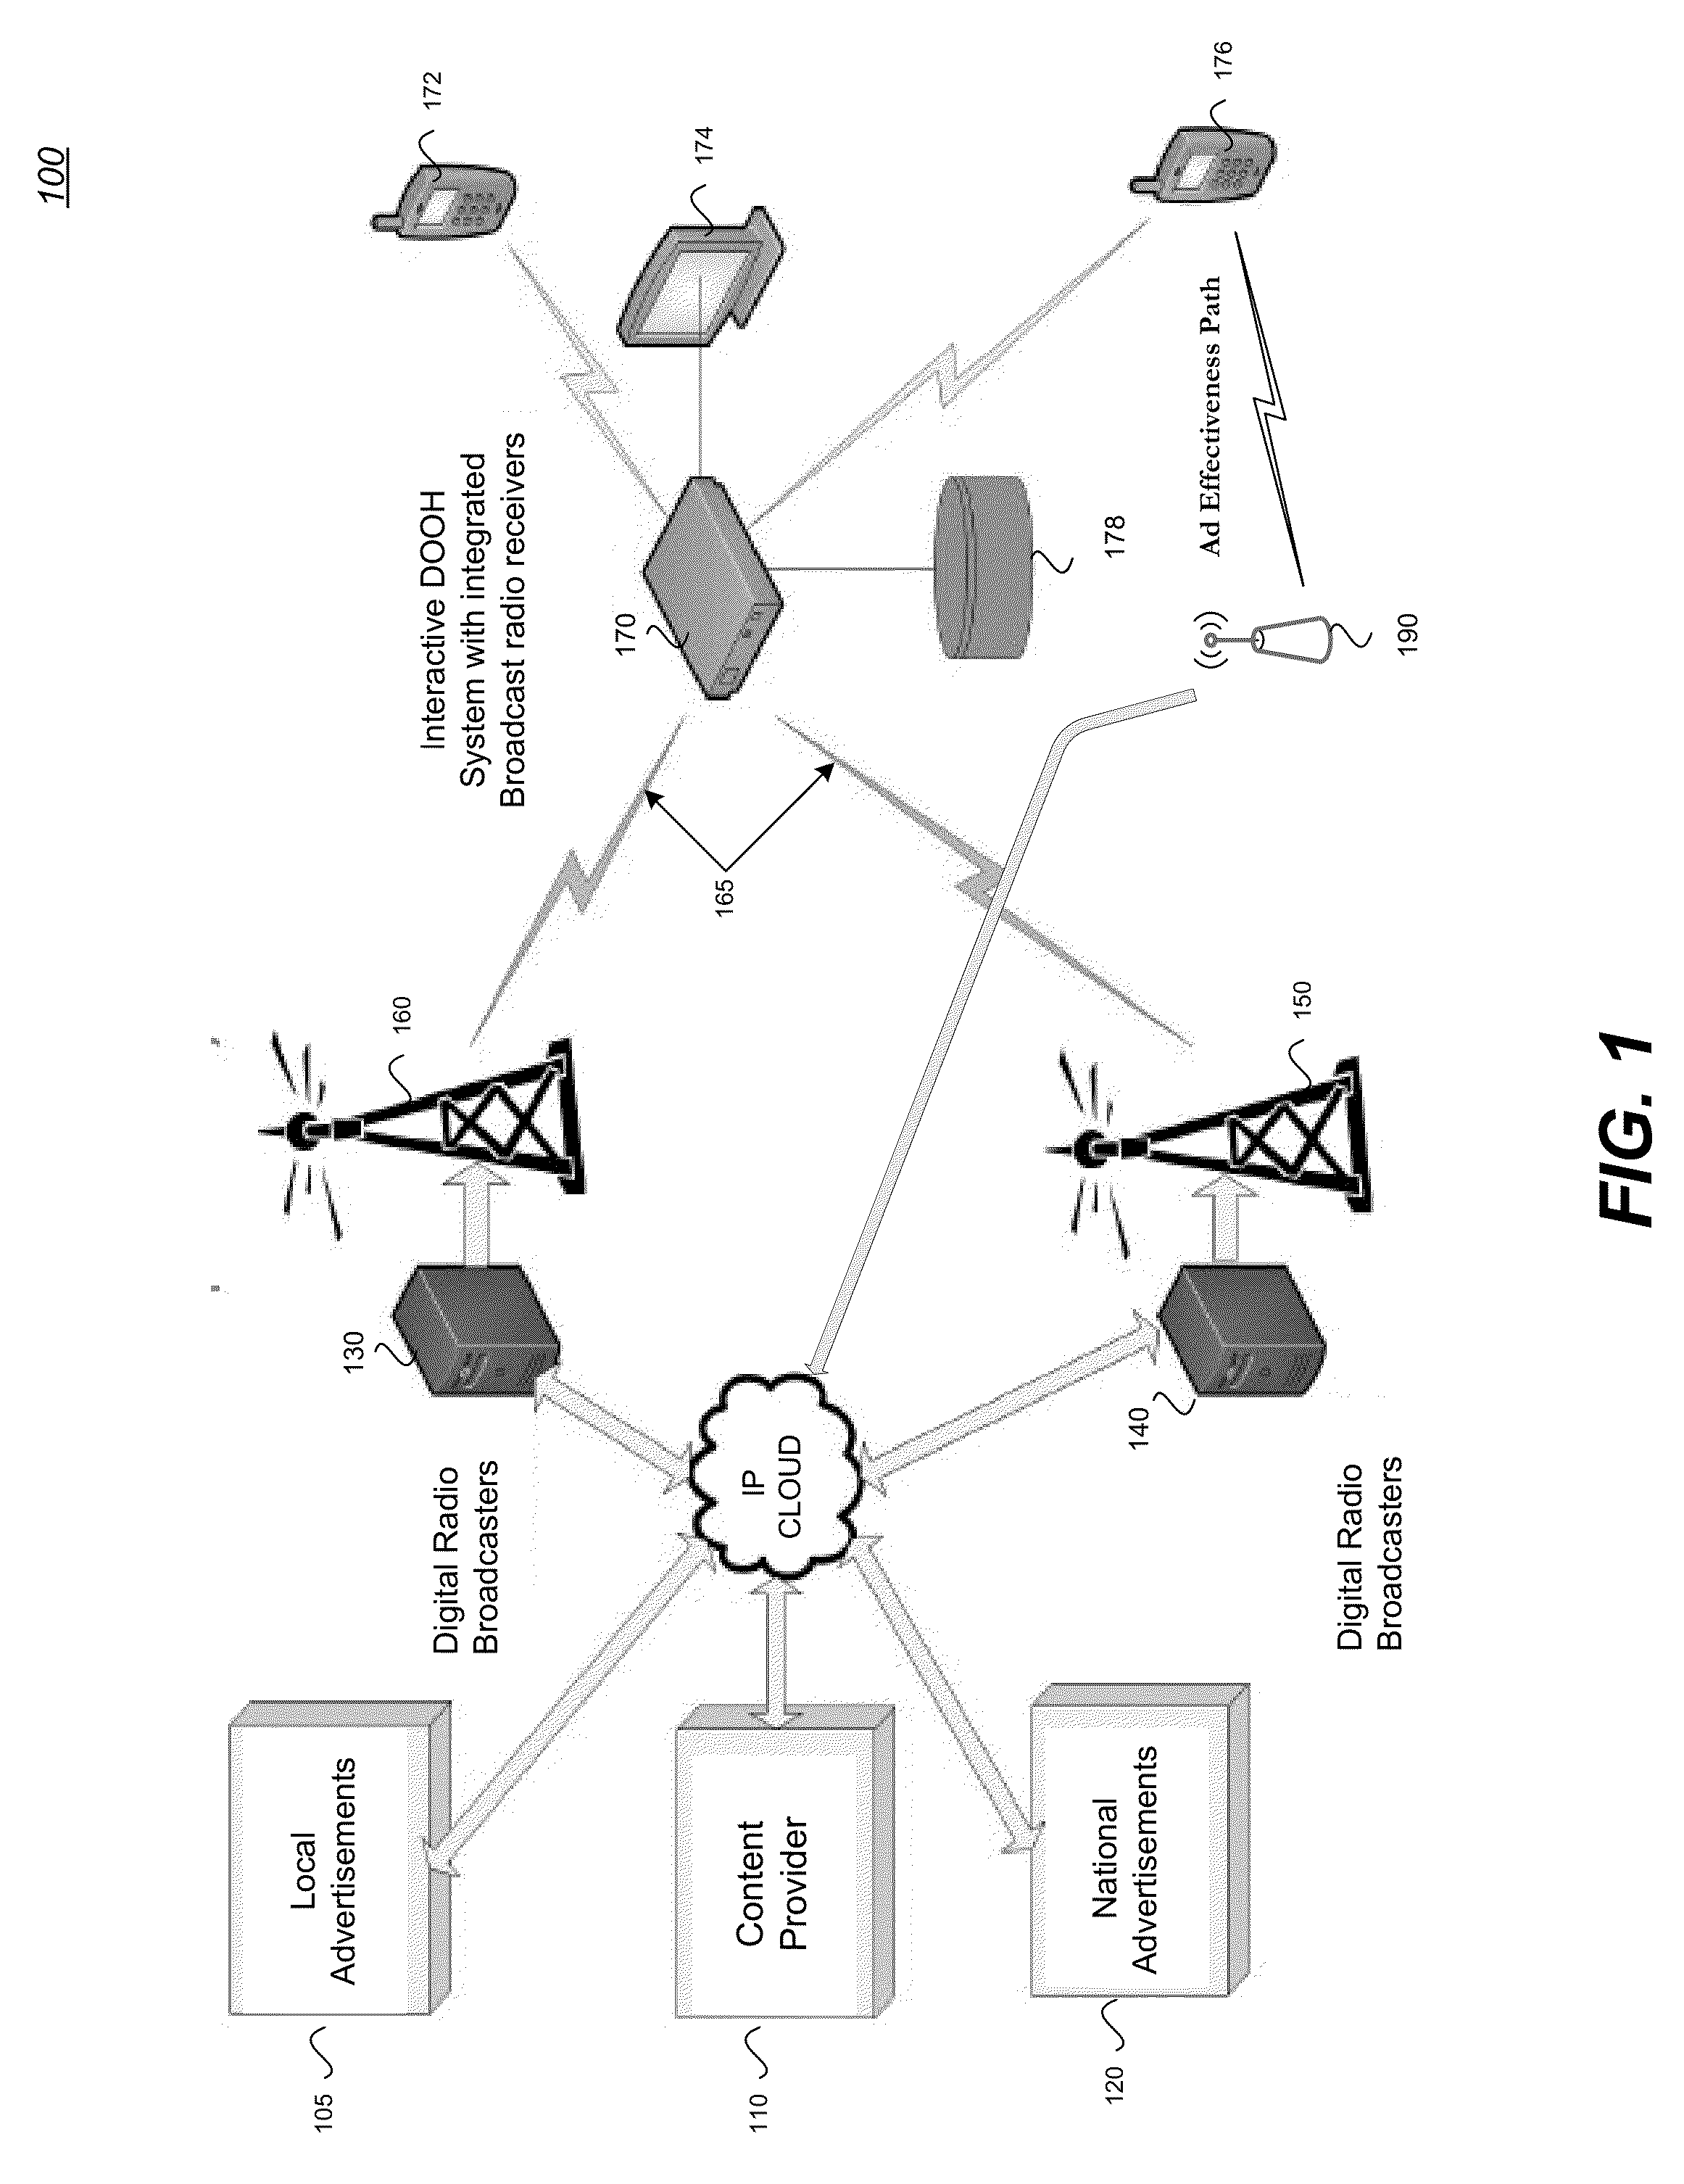 System and methods for rebroadcasting of radio ads over other mediums